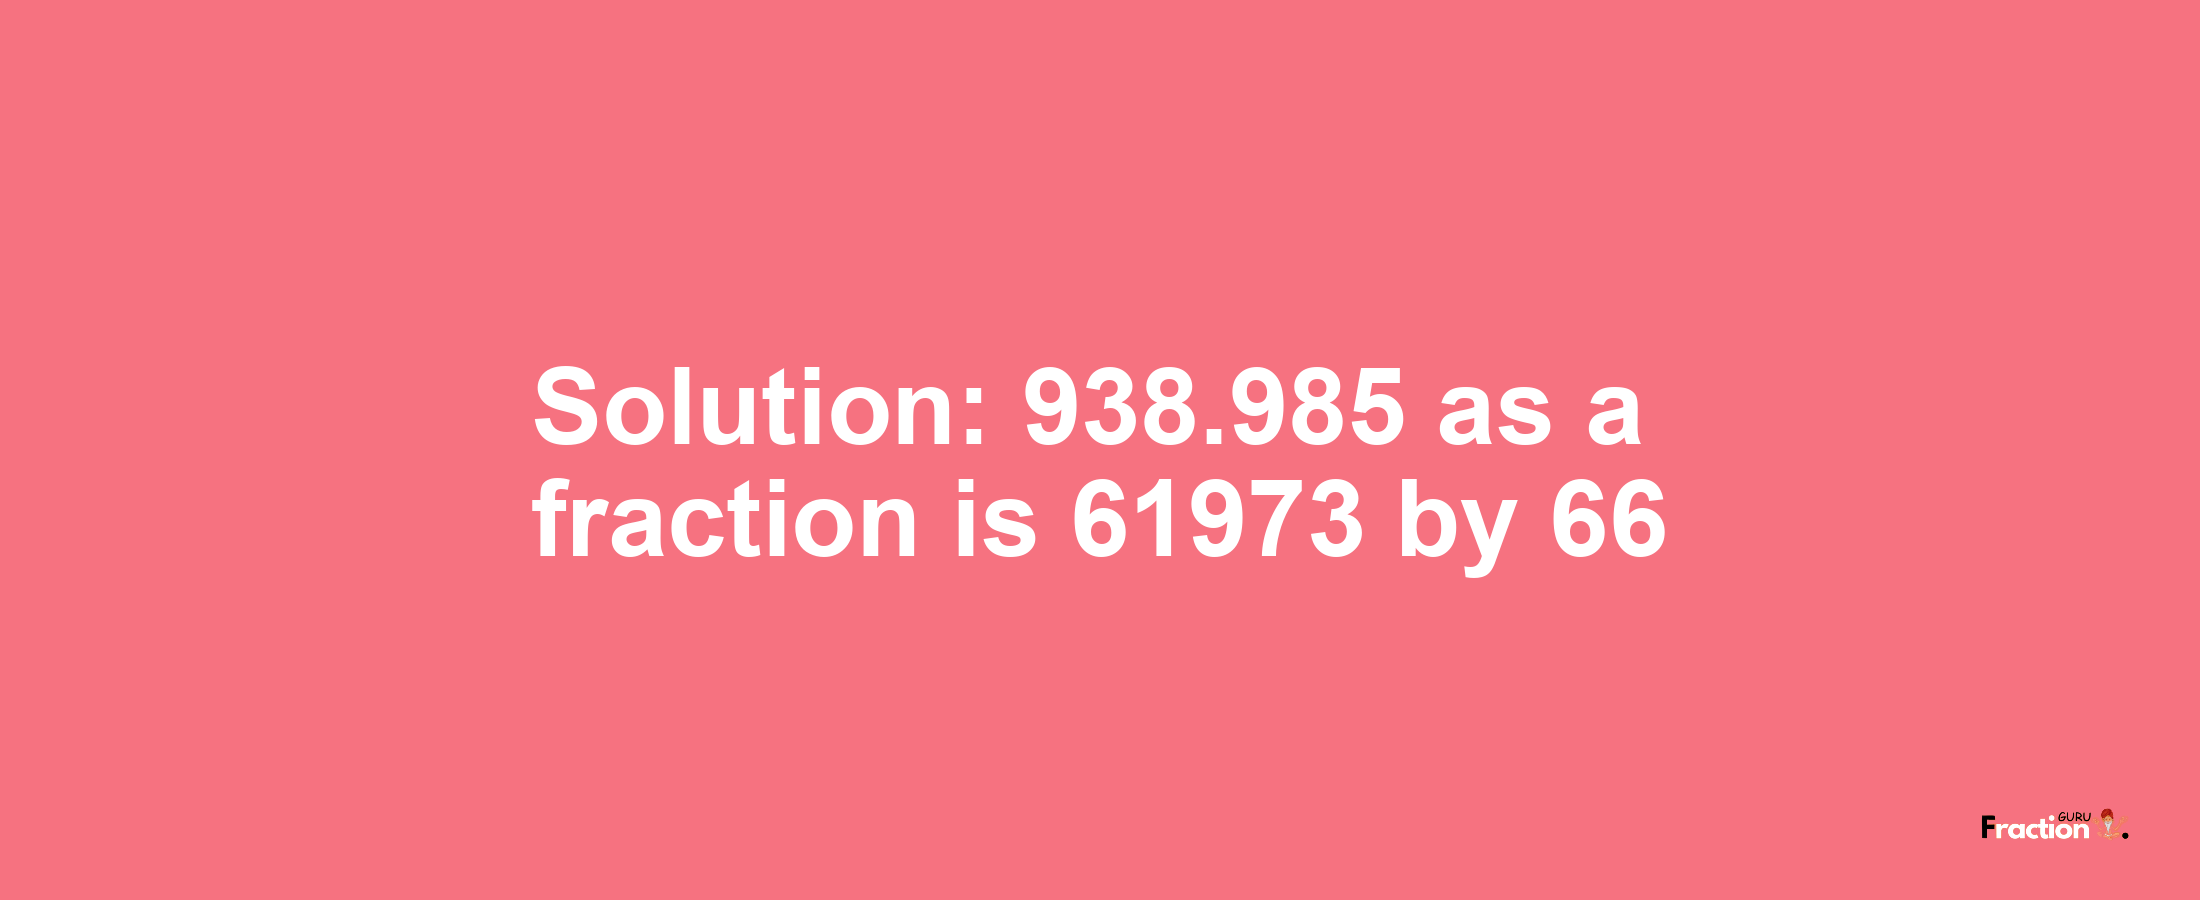 Solution:938.985 as a fraction is 61973/66